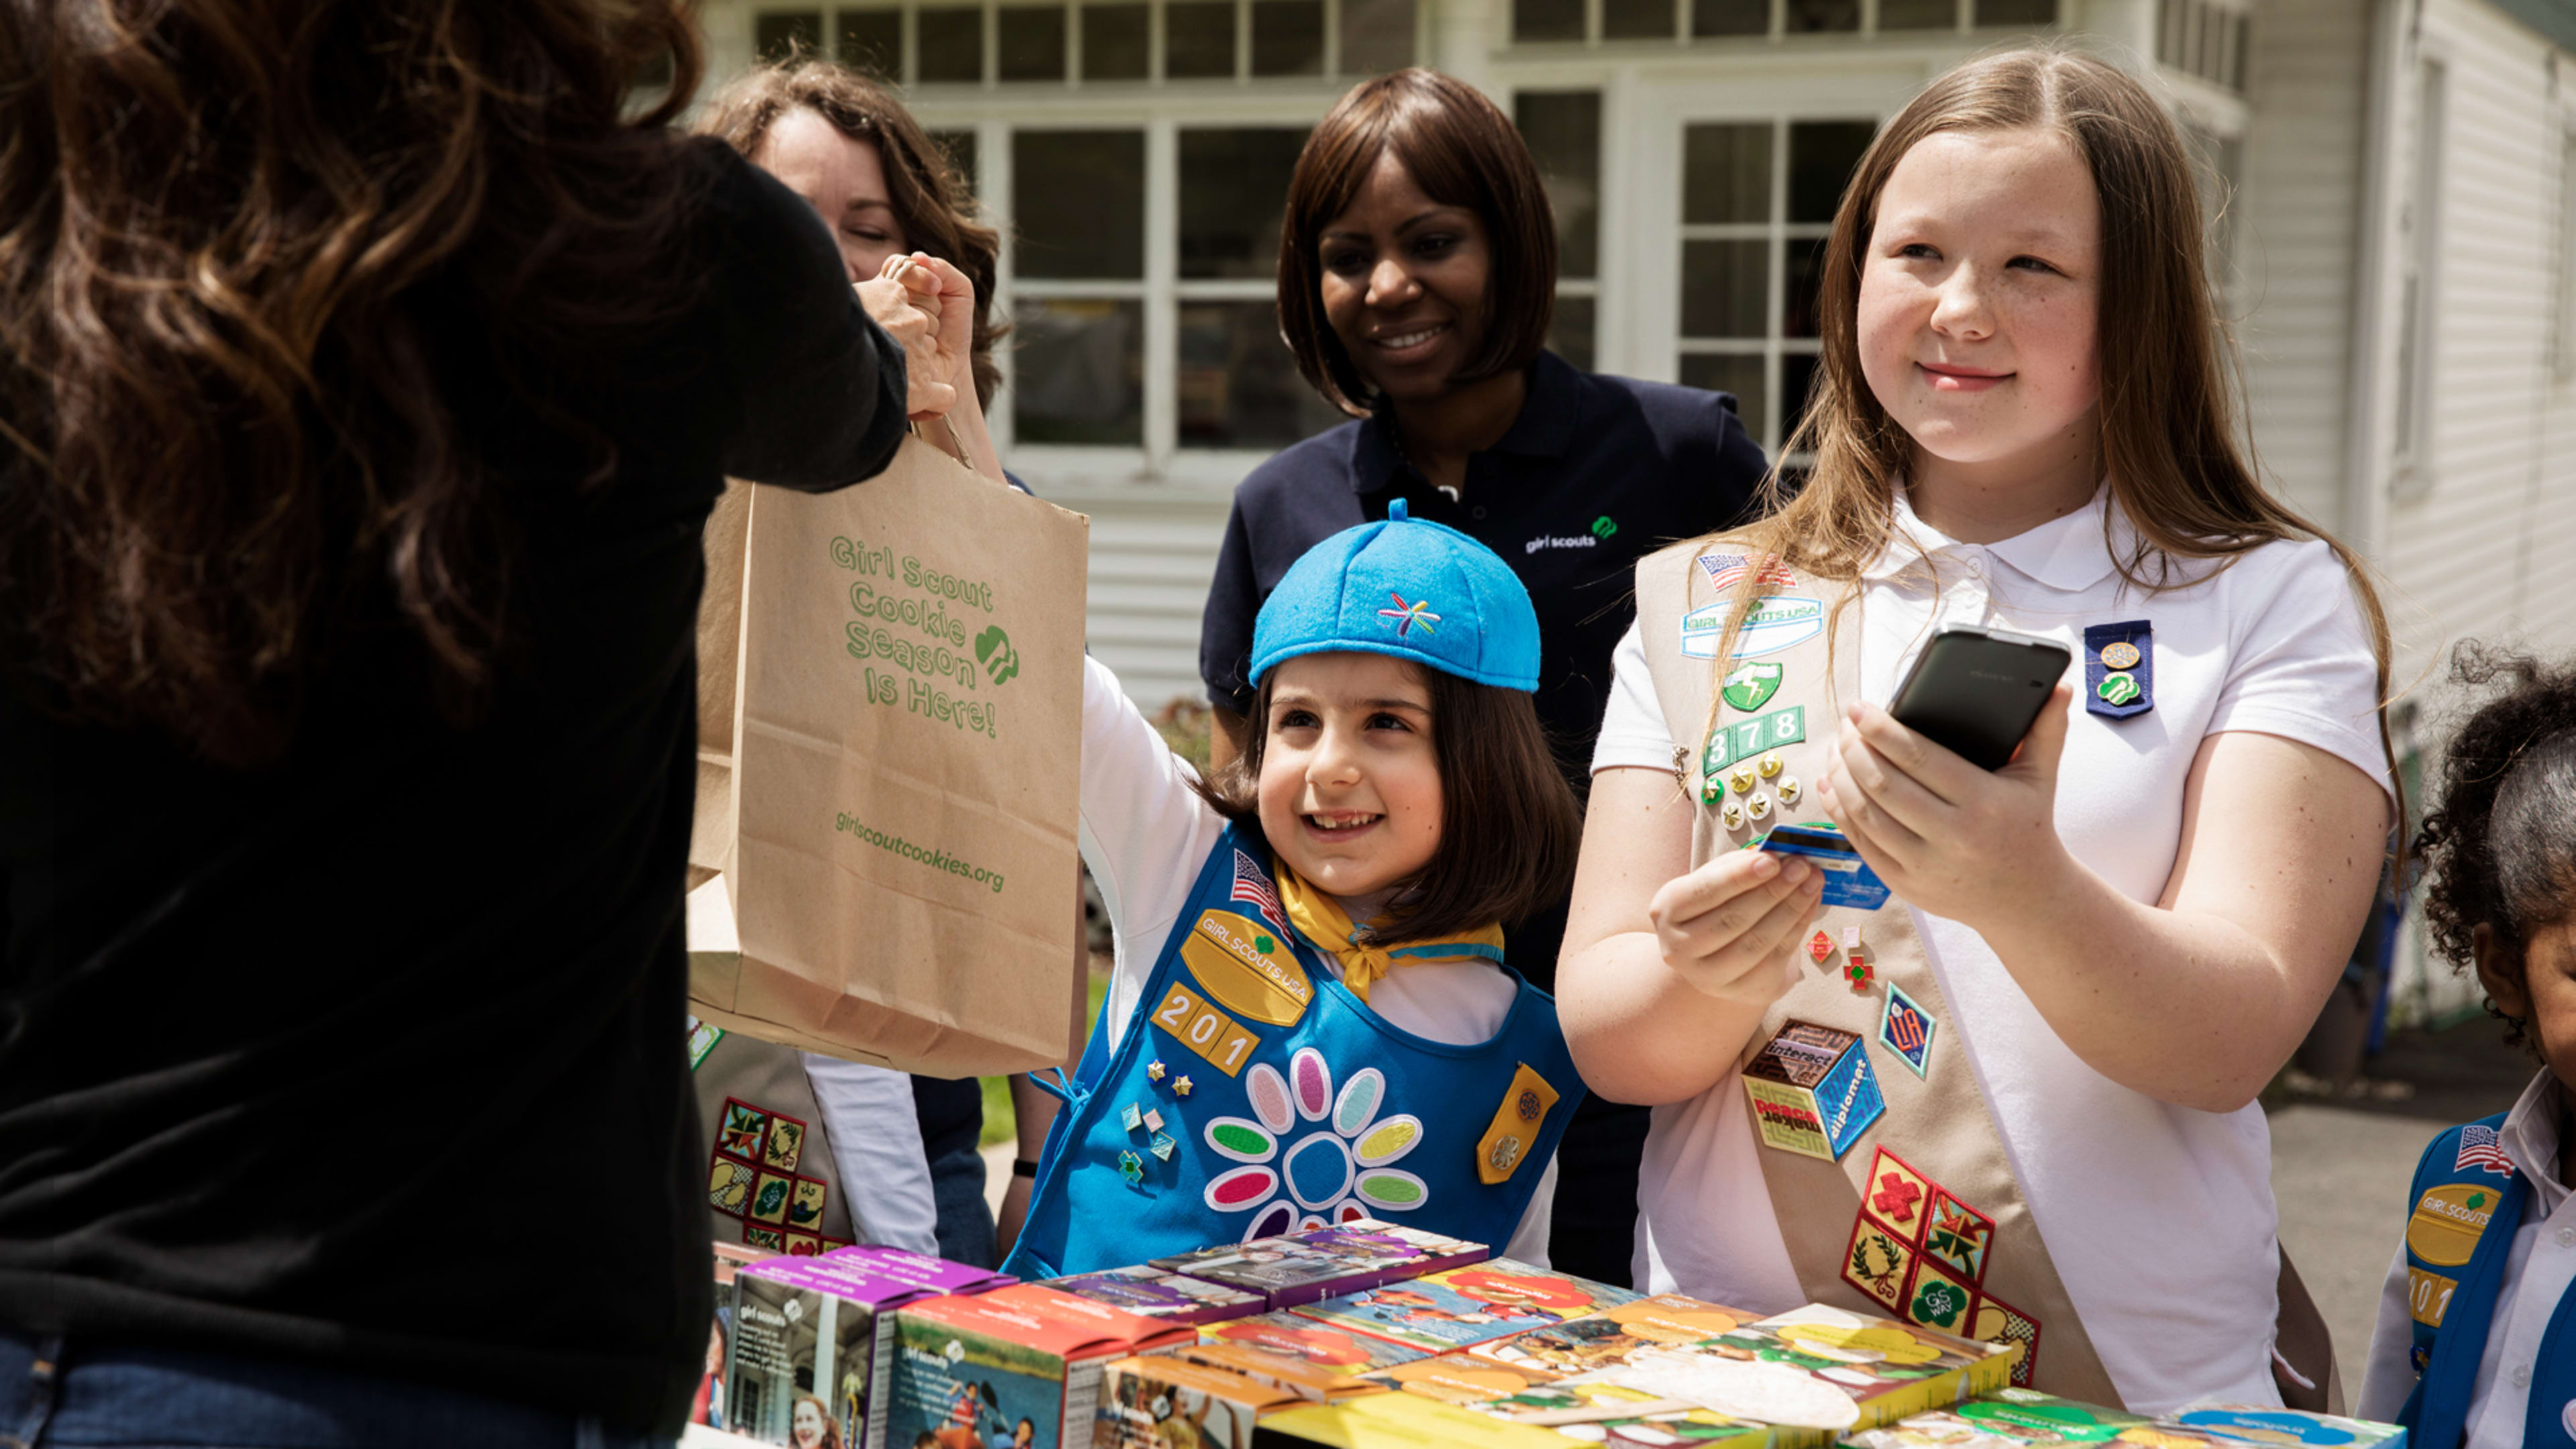 In these modern times, even Girl Scouts are going cashless for cookie sales